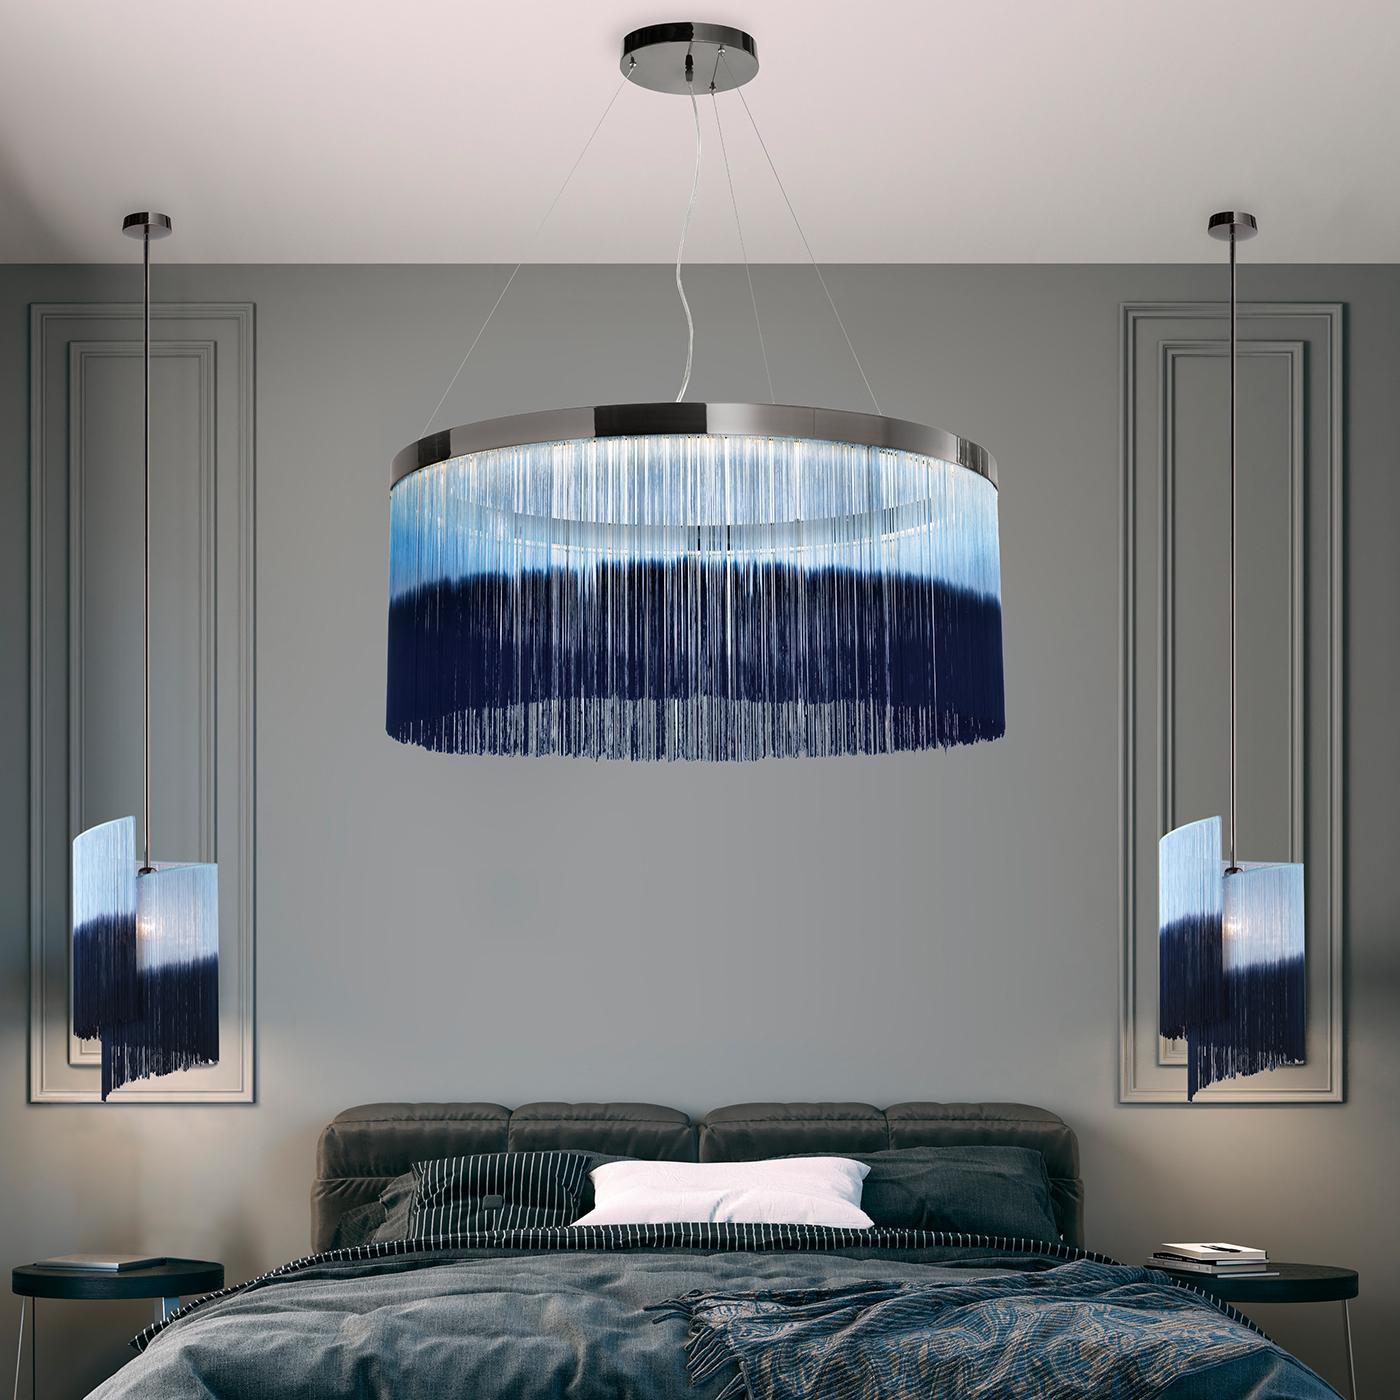 A statement of glamour and tailored character will imbue contemporary bedrooms or living rooms with the display of this luxe chandelier. A myriad of fringes hand-dyed in two contrasting tones of blue dangles from the glowing metal ring that hosts